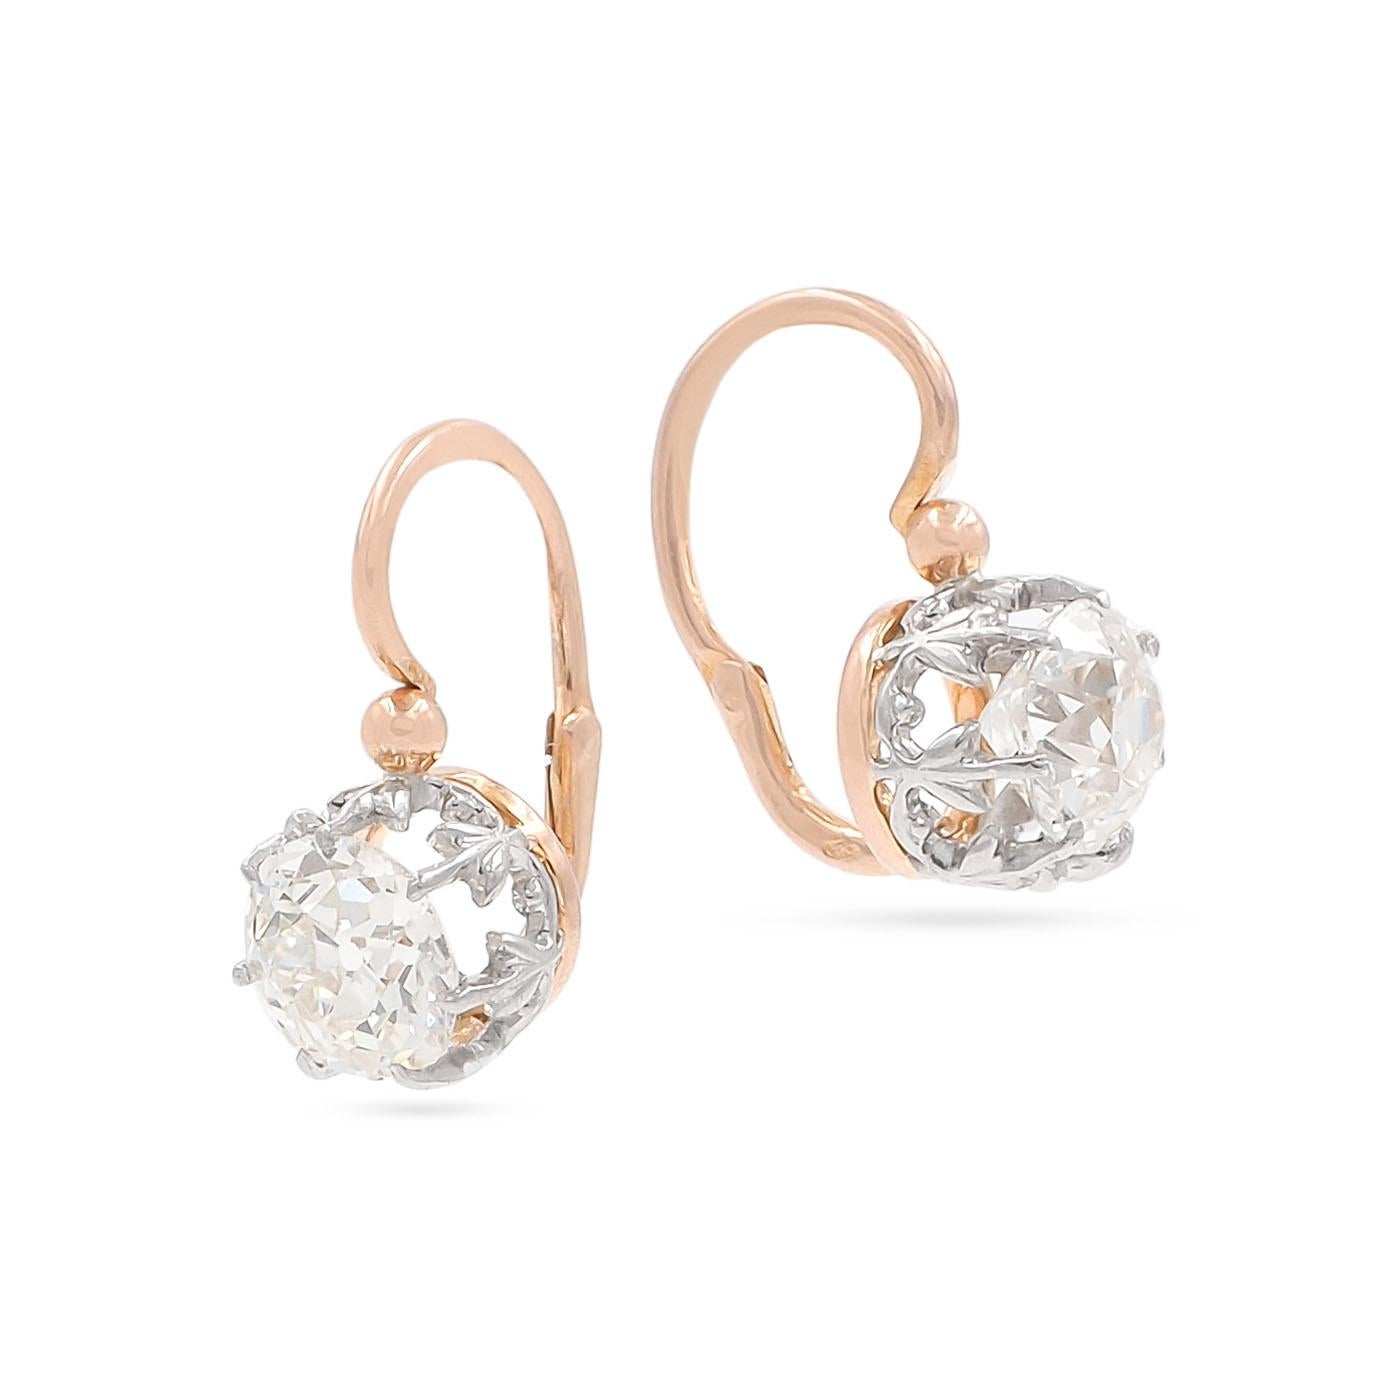 French Belle Epoque (Edwardian Era) 2.52 Ctw. Old European Cut Diamond Drop Earrings composed of platinum & 18k yellow gold. With 1 Old European Cut diamond per earring, set into platinum. Both of the Old European Cut diamonds are GIA certified -